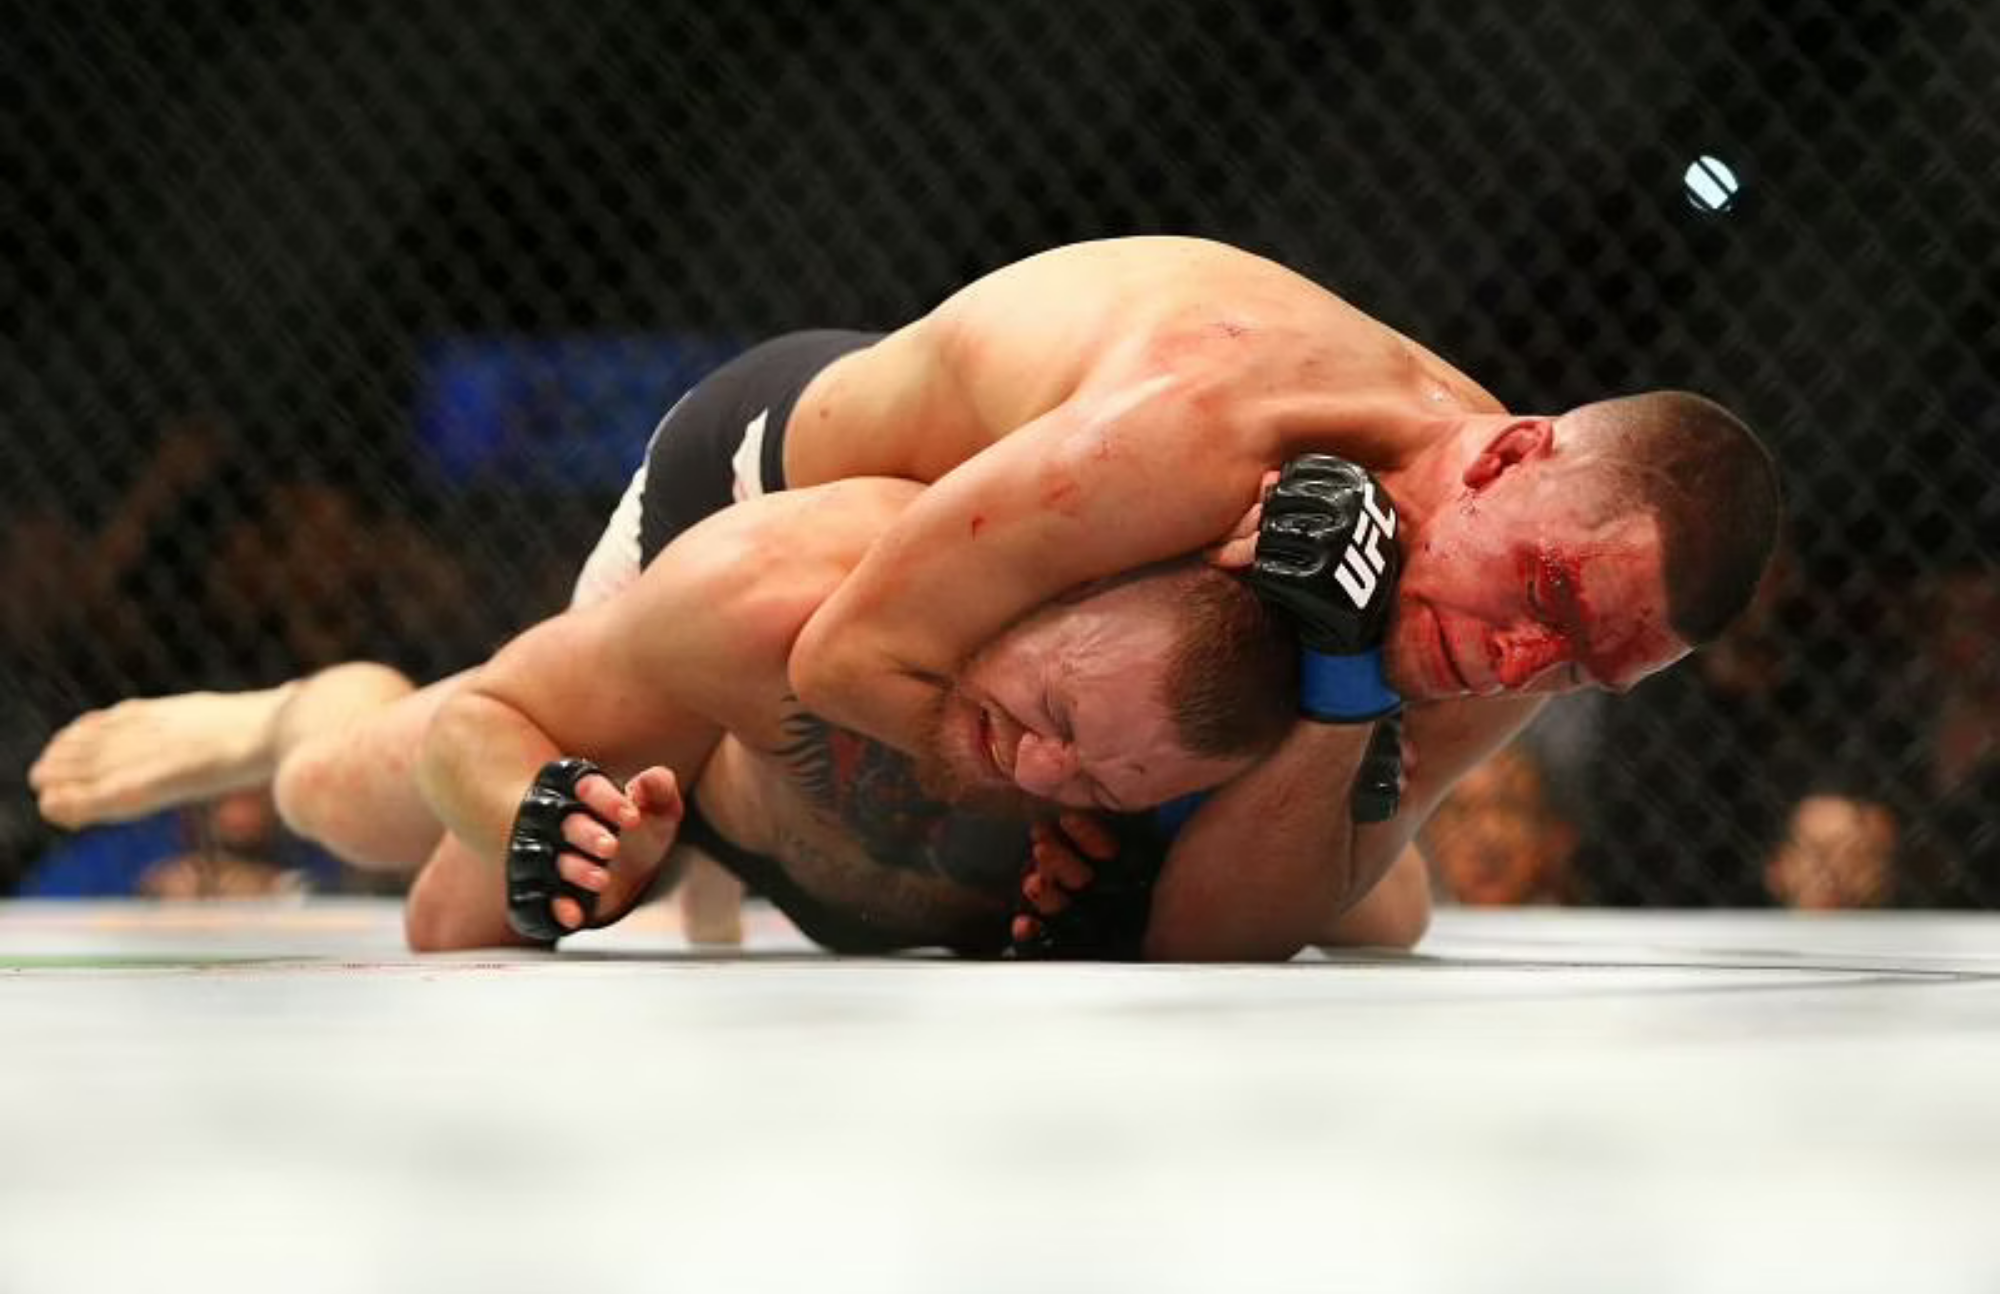 Nate Diaz choked McGregor to submission in the second round of their first fight